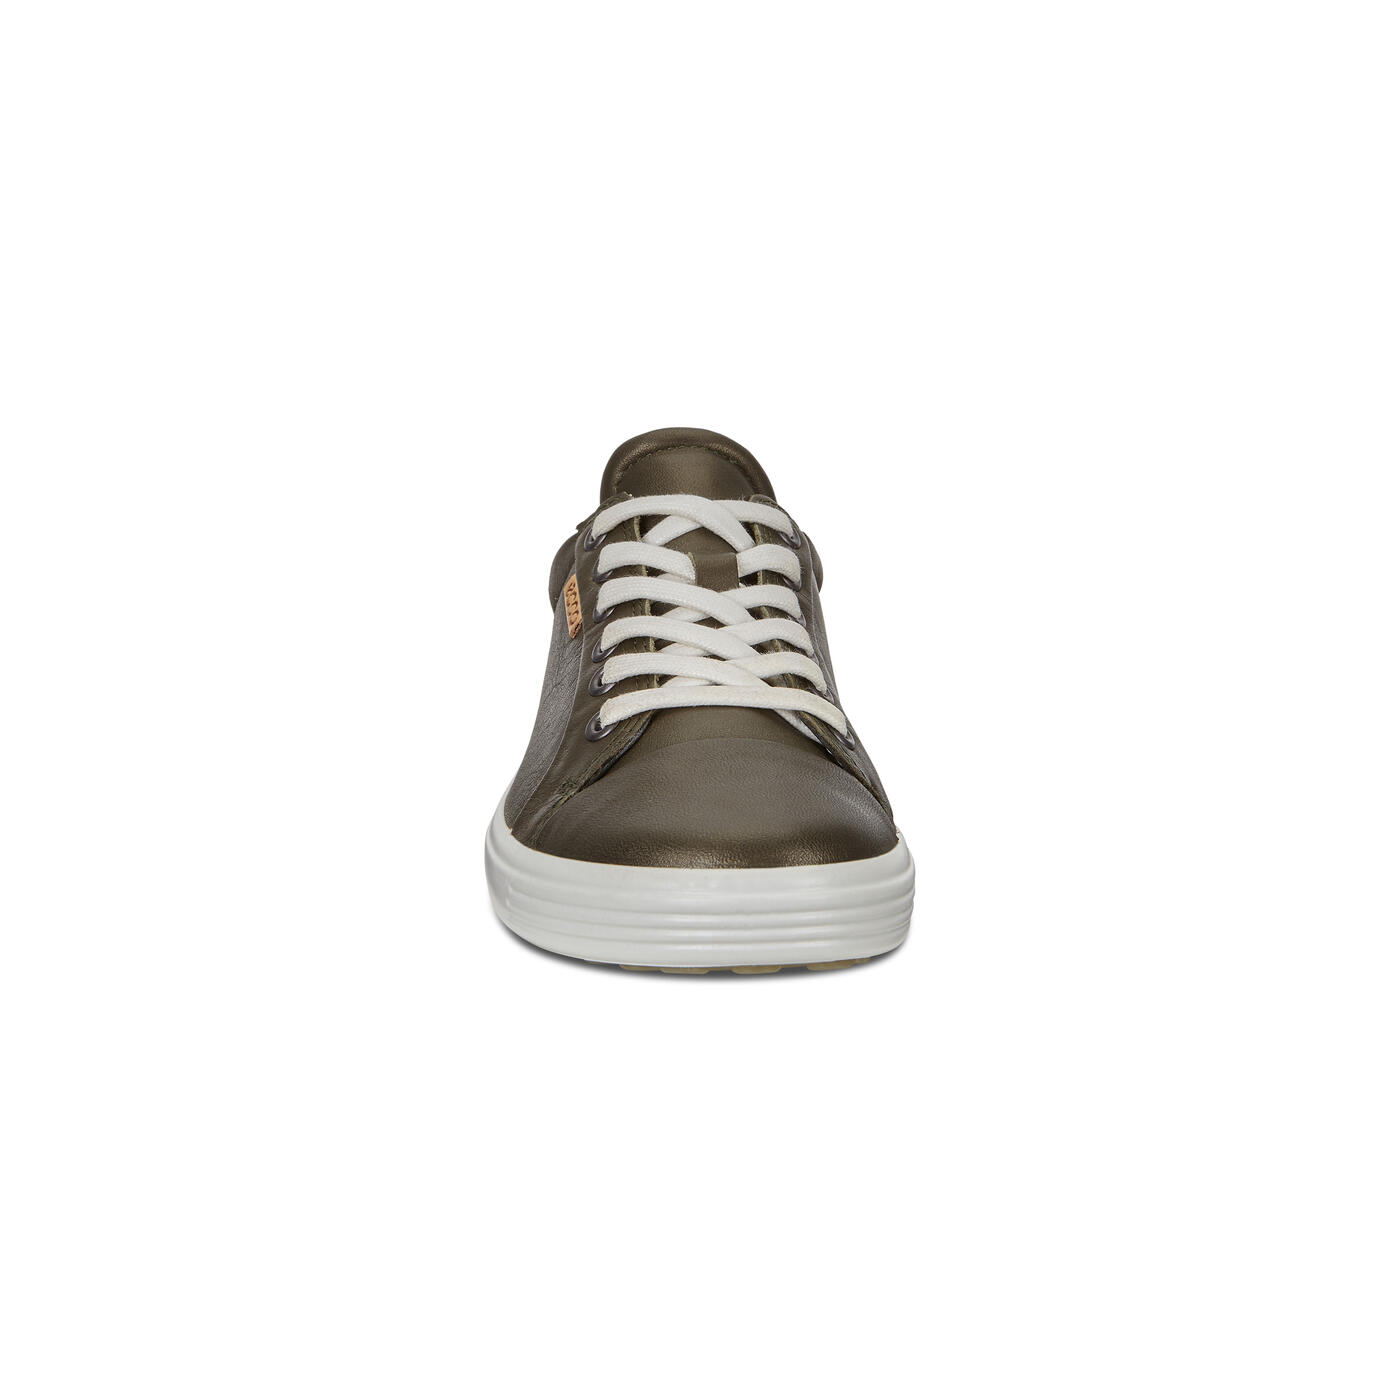 Soft 7 Women's Sneakers | Official Store | ECCO® Shoes